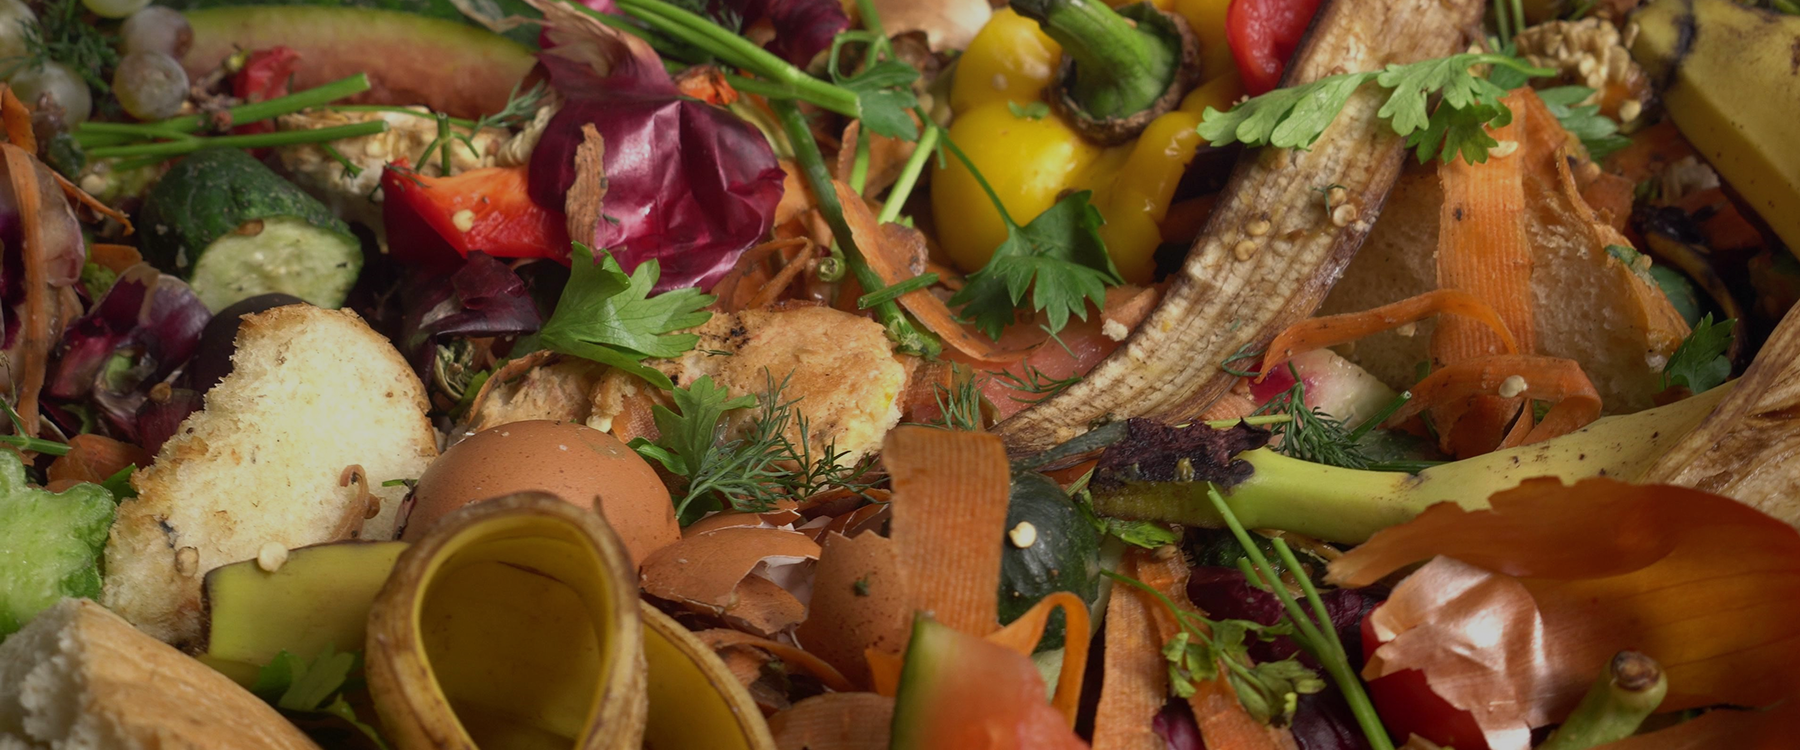 Food waste, including egg shells, peppers, onion, banana and more scattered across a table.